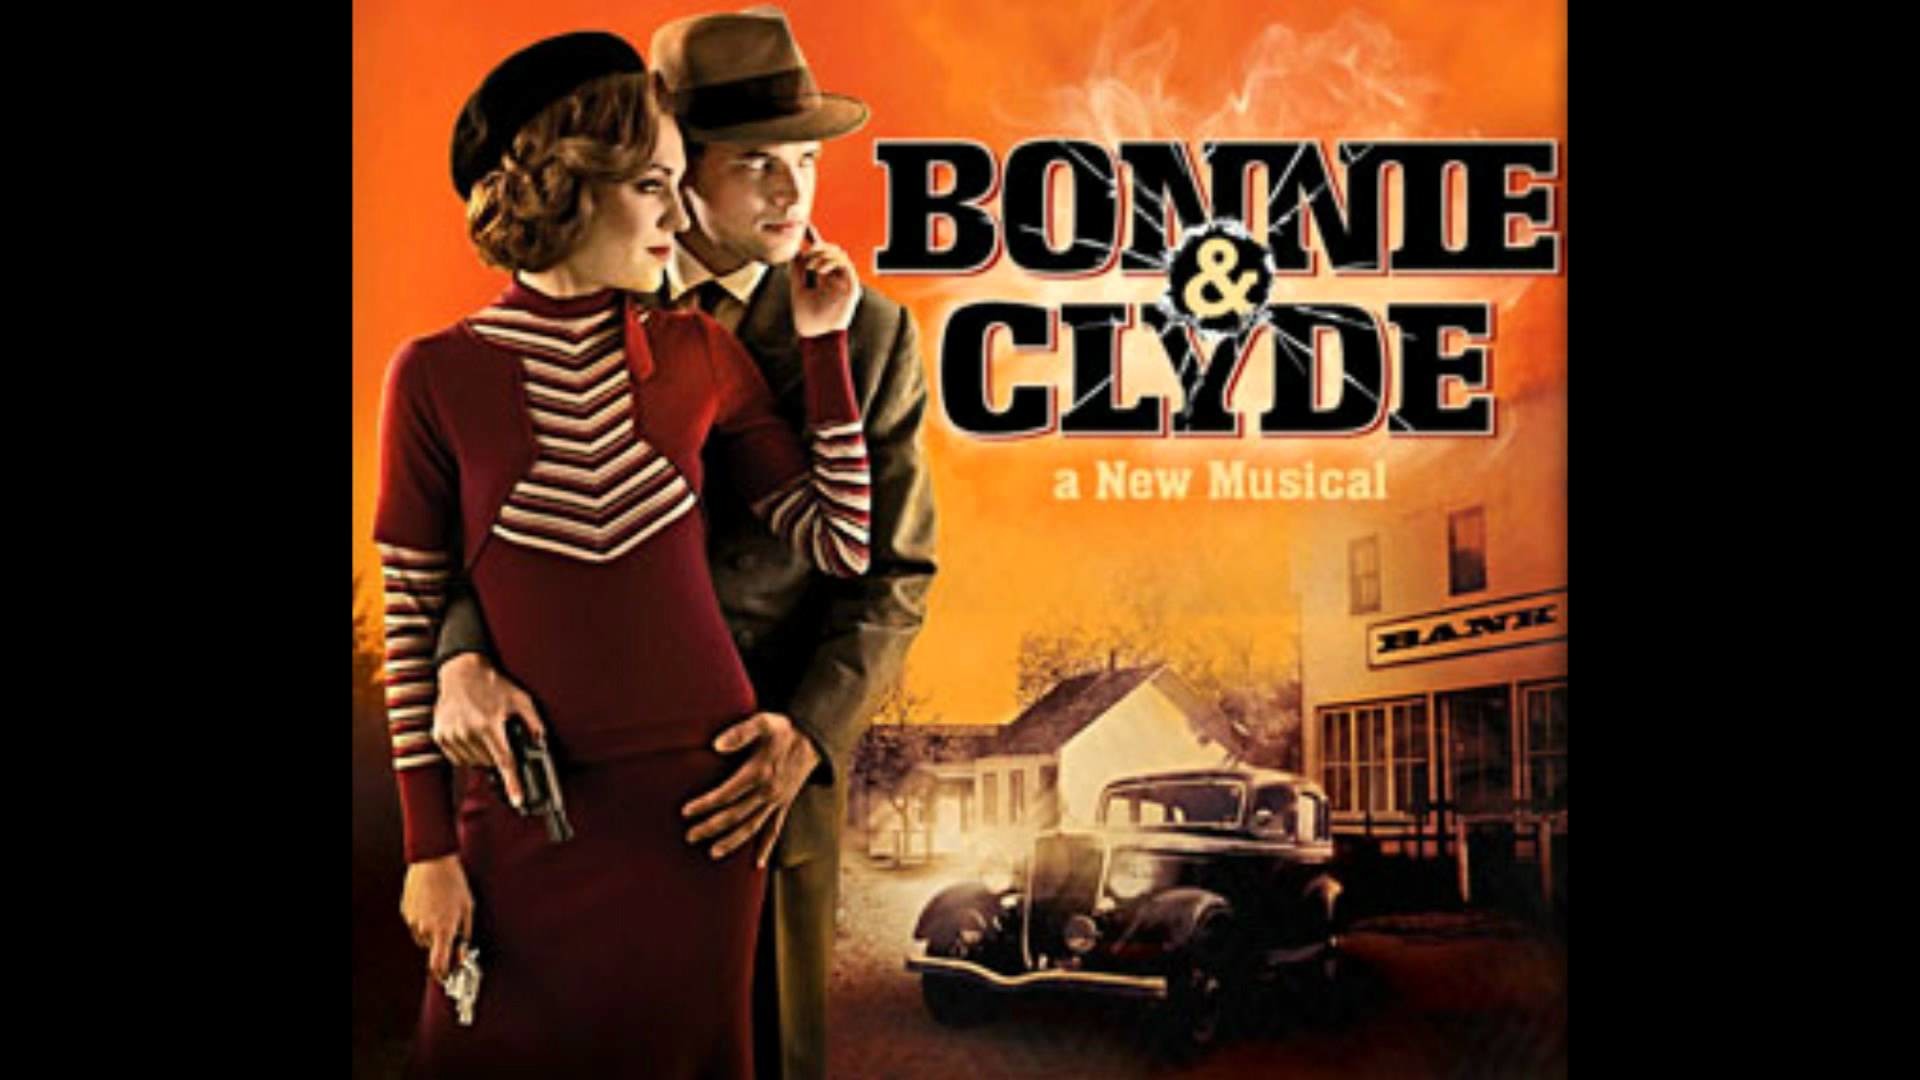 1920x1080 "Bonnie" - Bonnie & Clyde the Musical - Jeremy Jordan - Piano Backing Track  - YouTube